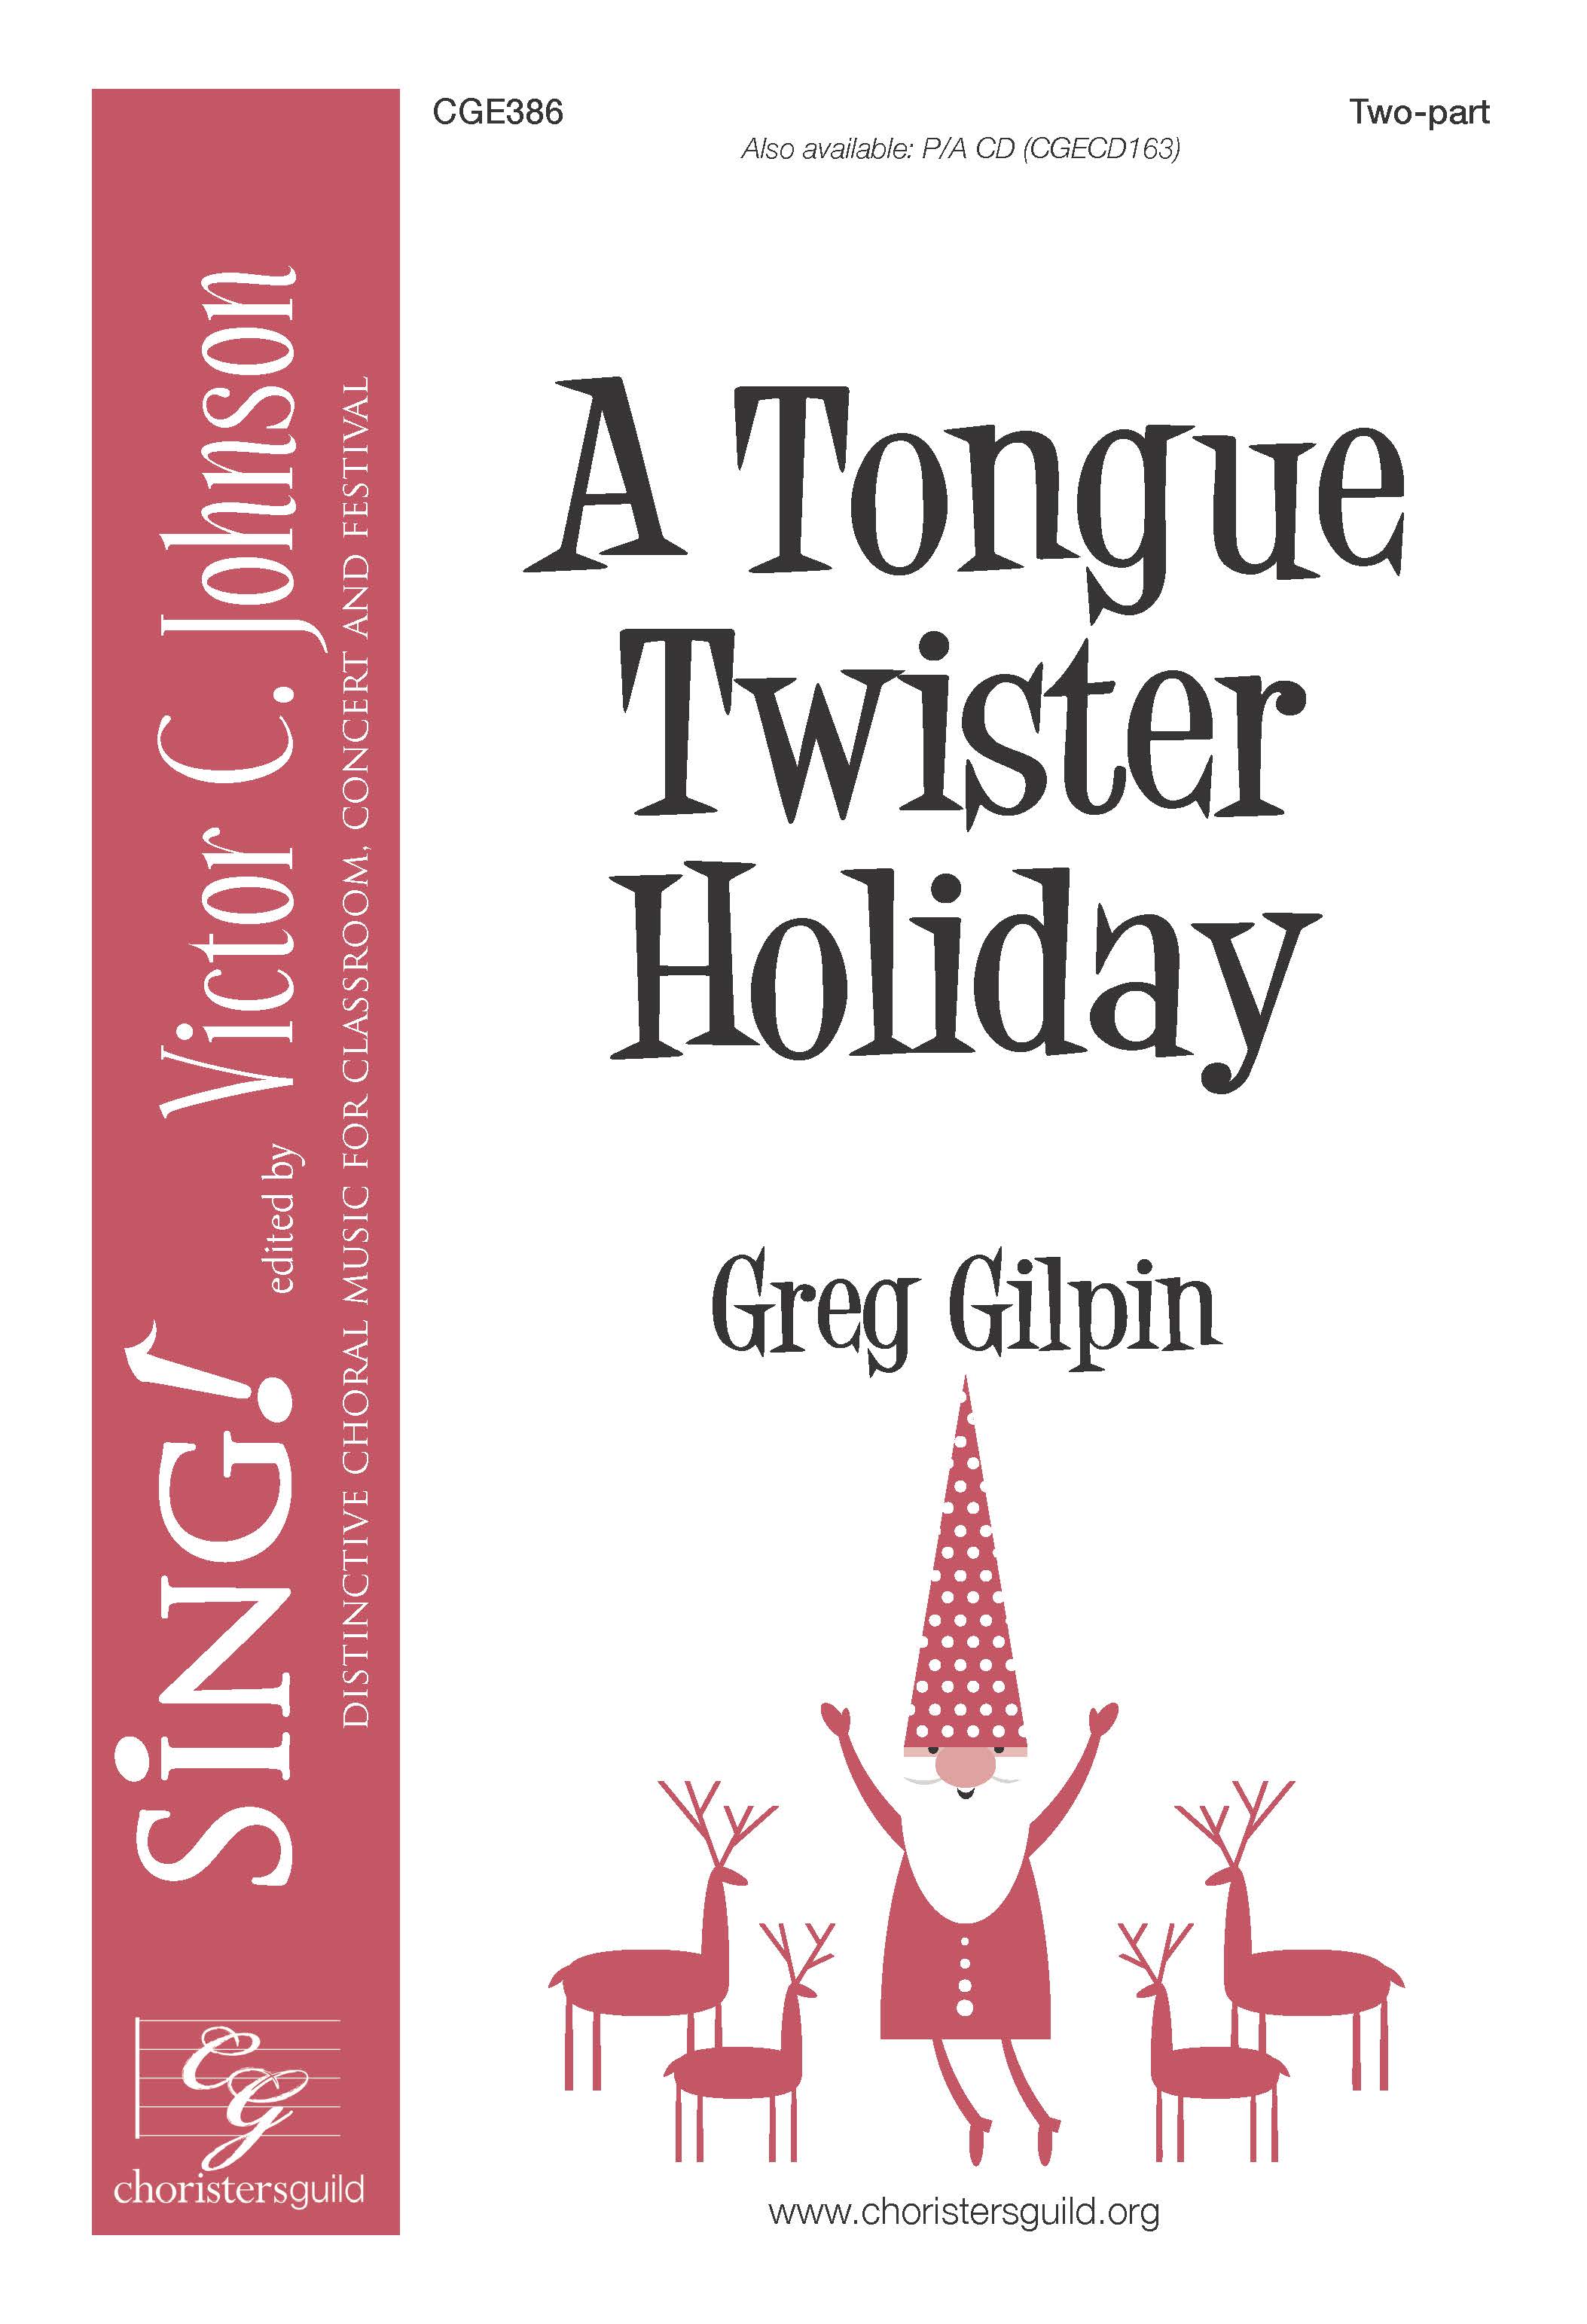 A Tongue Twister Holiday - Two-part